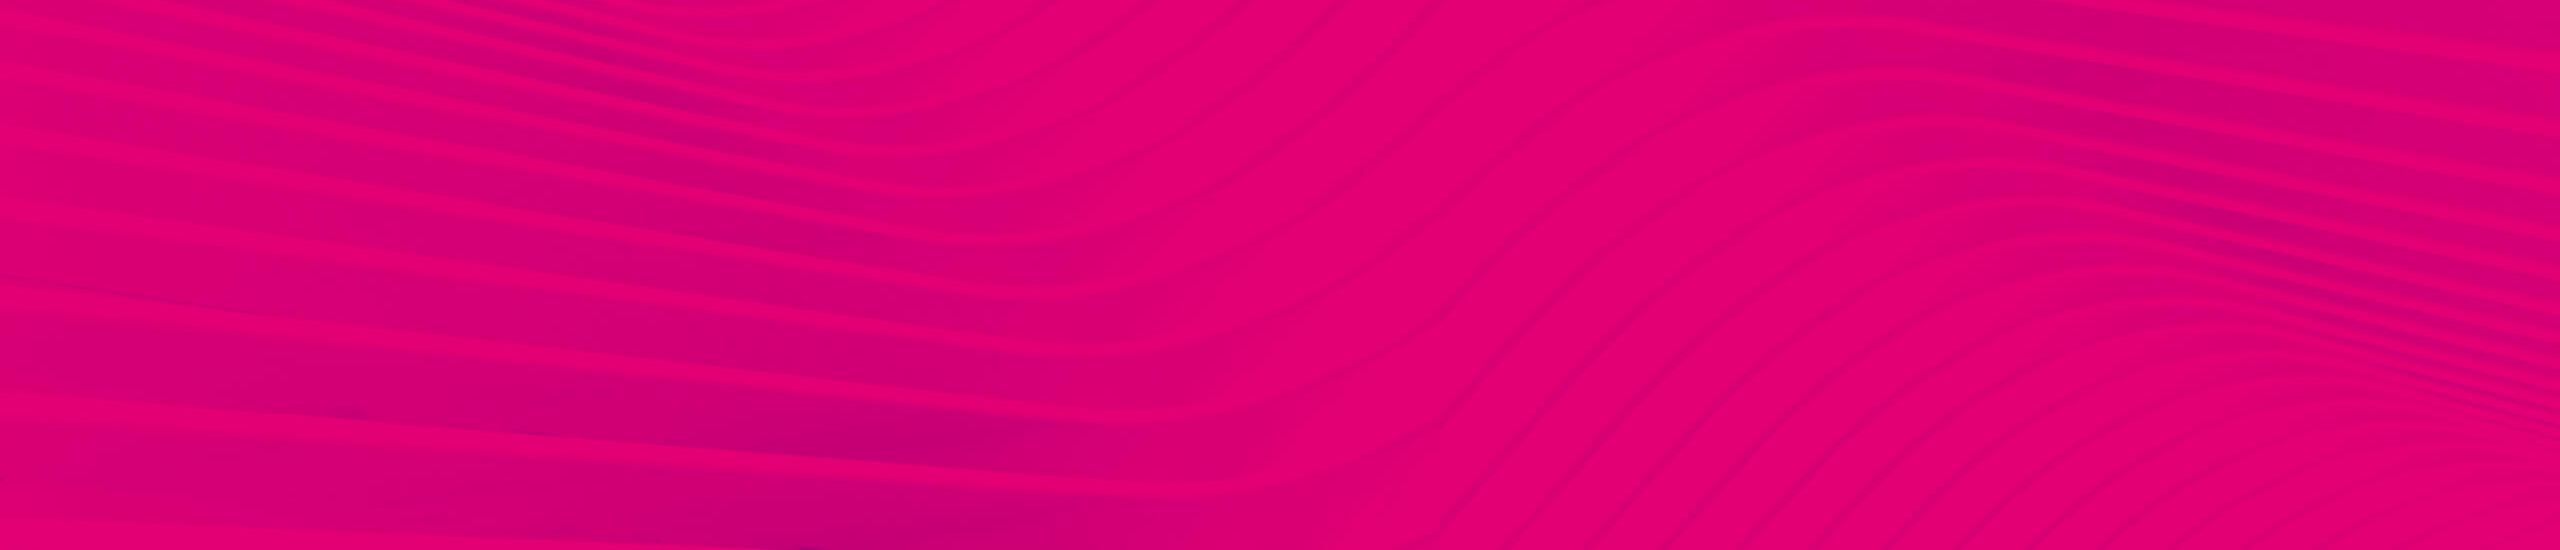 Magenta background white paper: Industrial Security in the energy industry